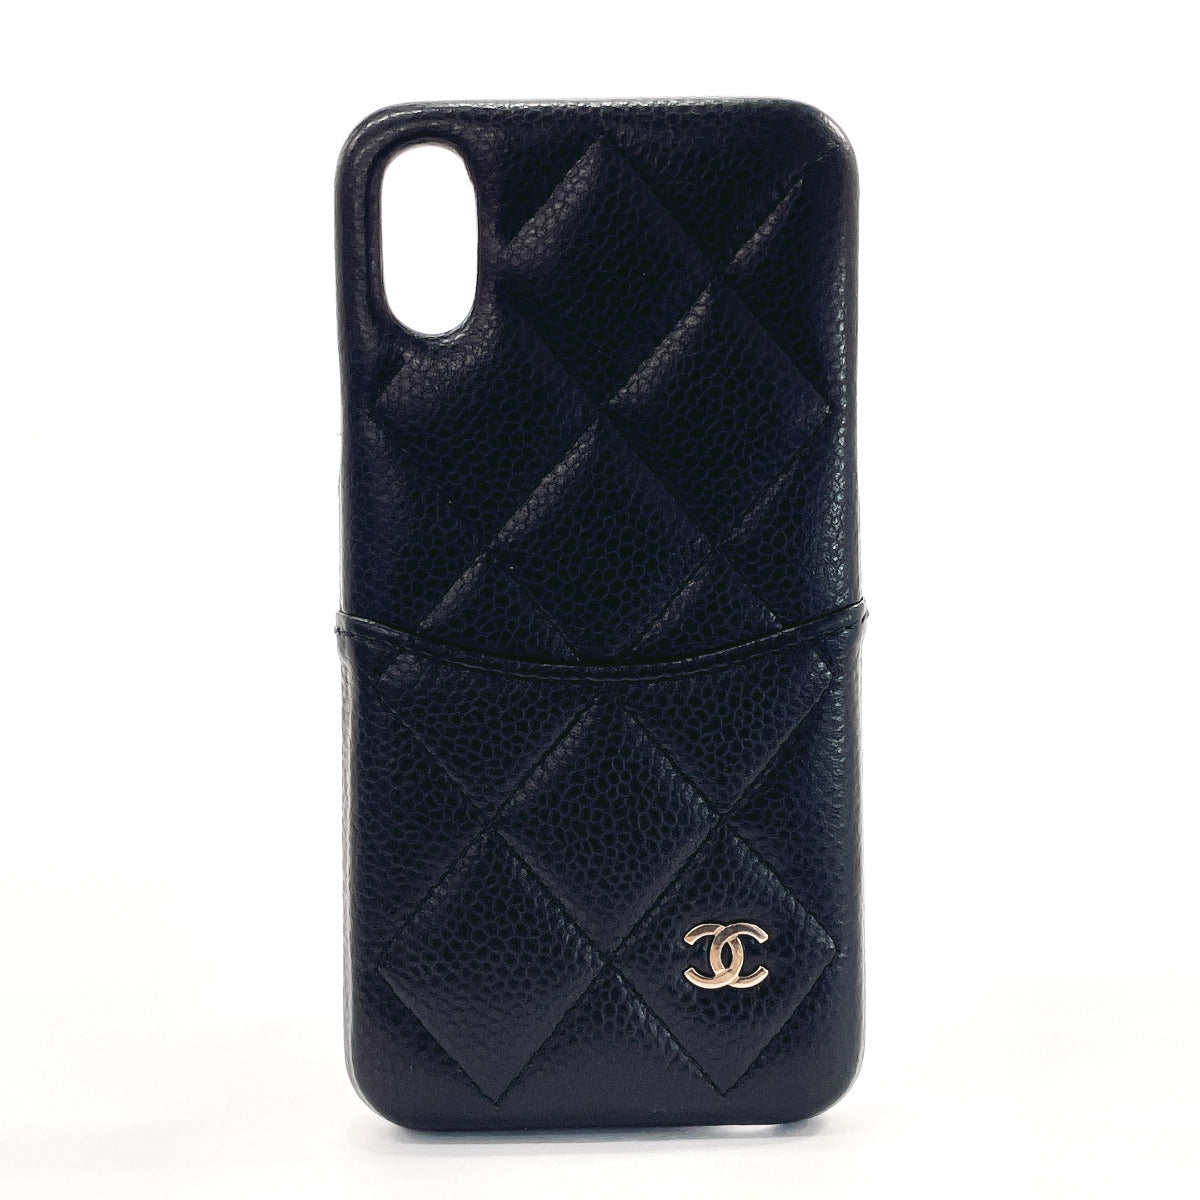 Auth CHANEL Matelasse XS Max iPhone Case Caviar Skin Leather Black US  SELLER